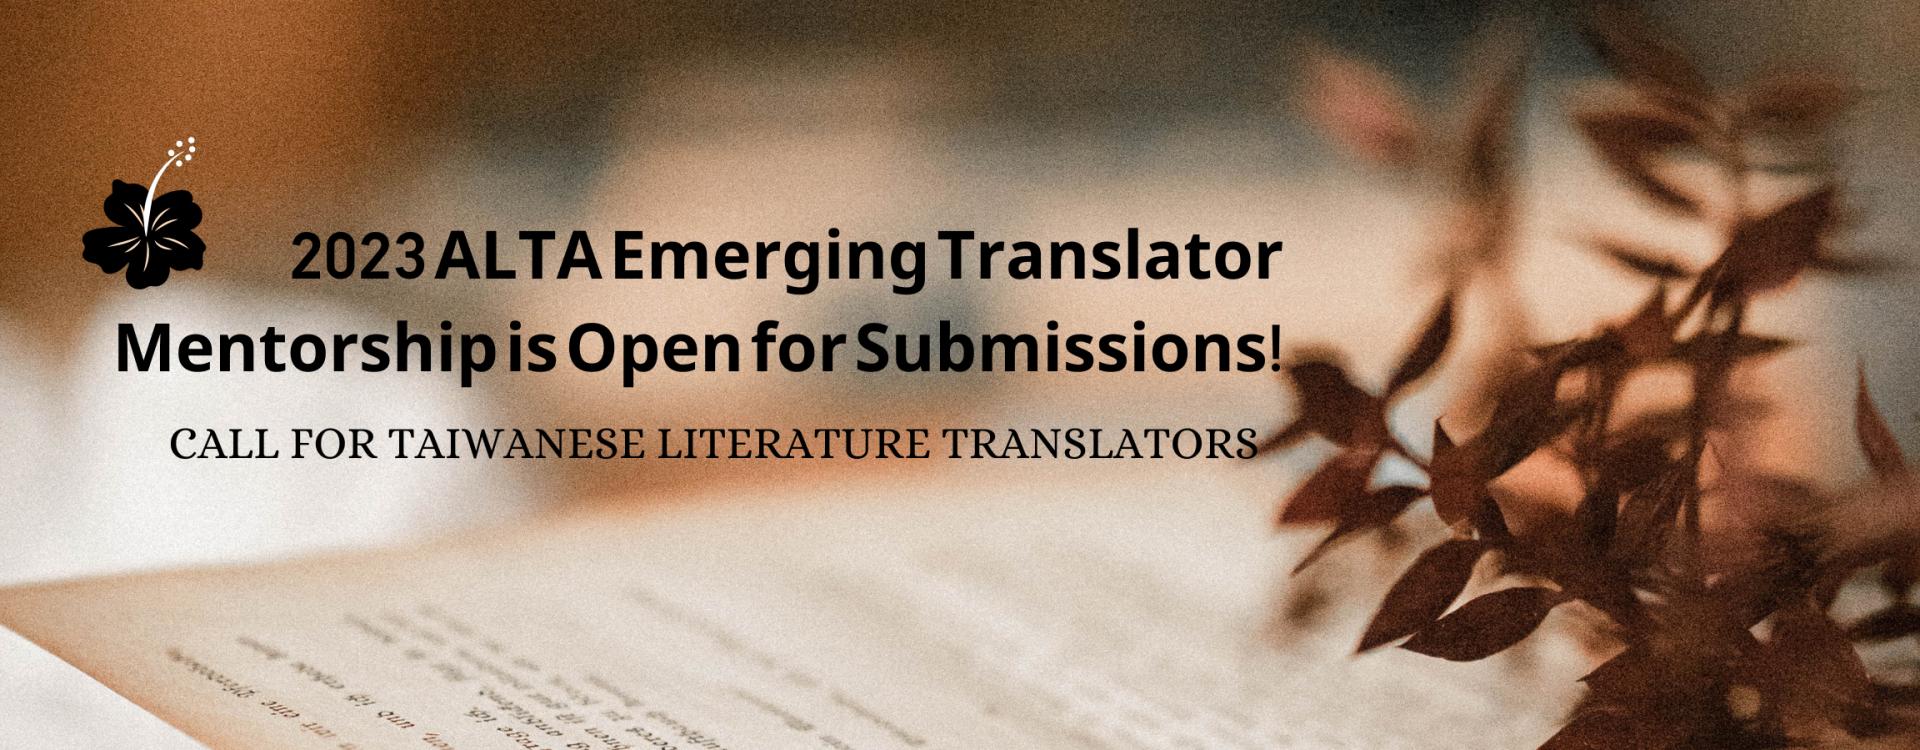 2023 ALTA Emerging Translator Mentorship is Open for Submissions! Call for Taiwanese Translators